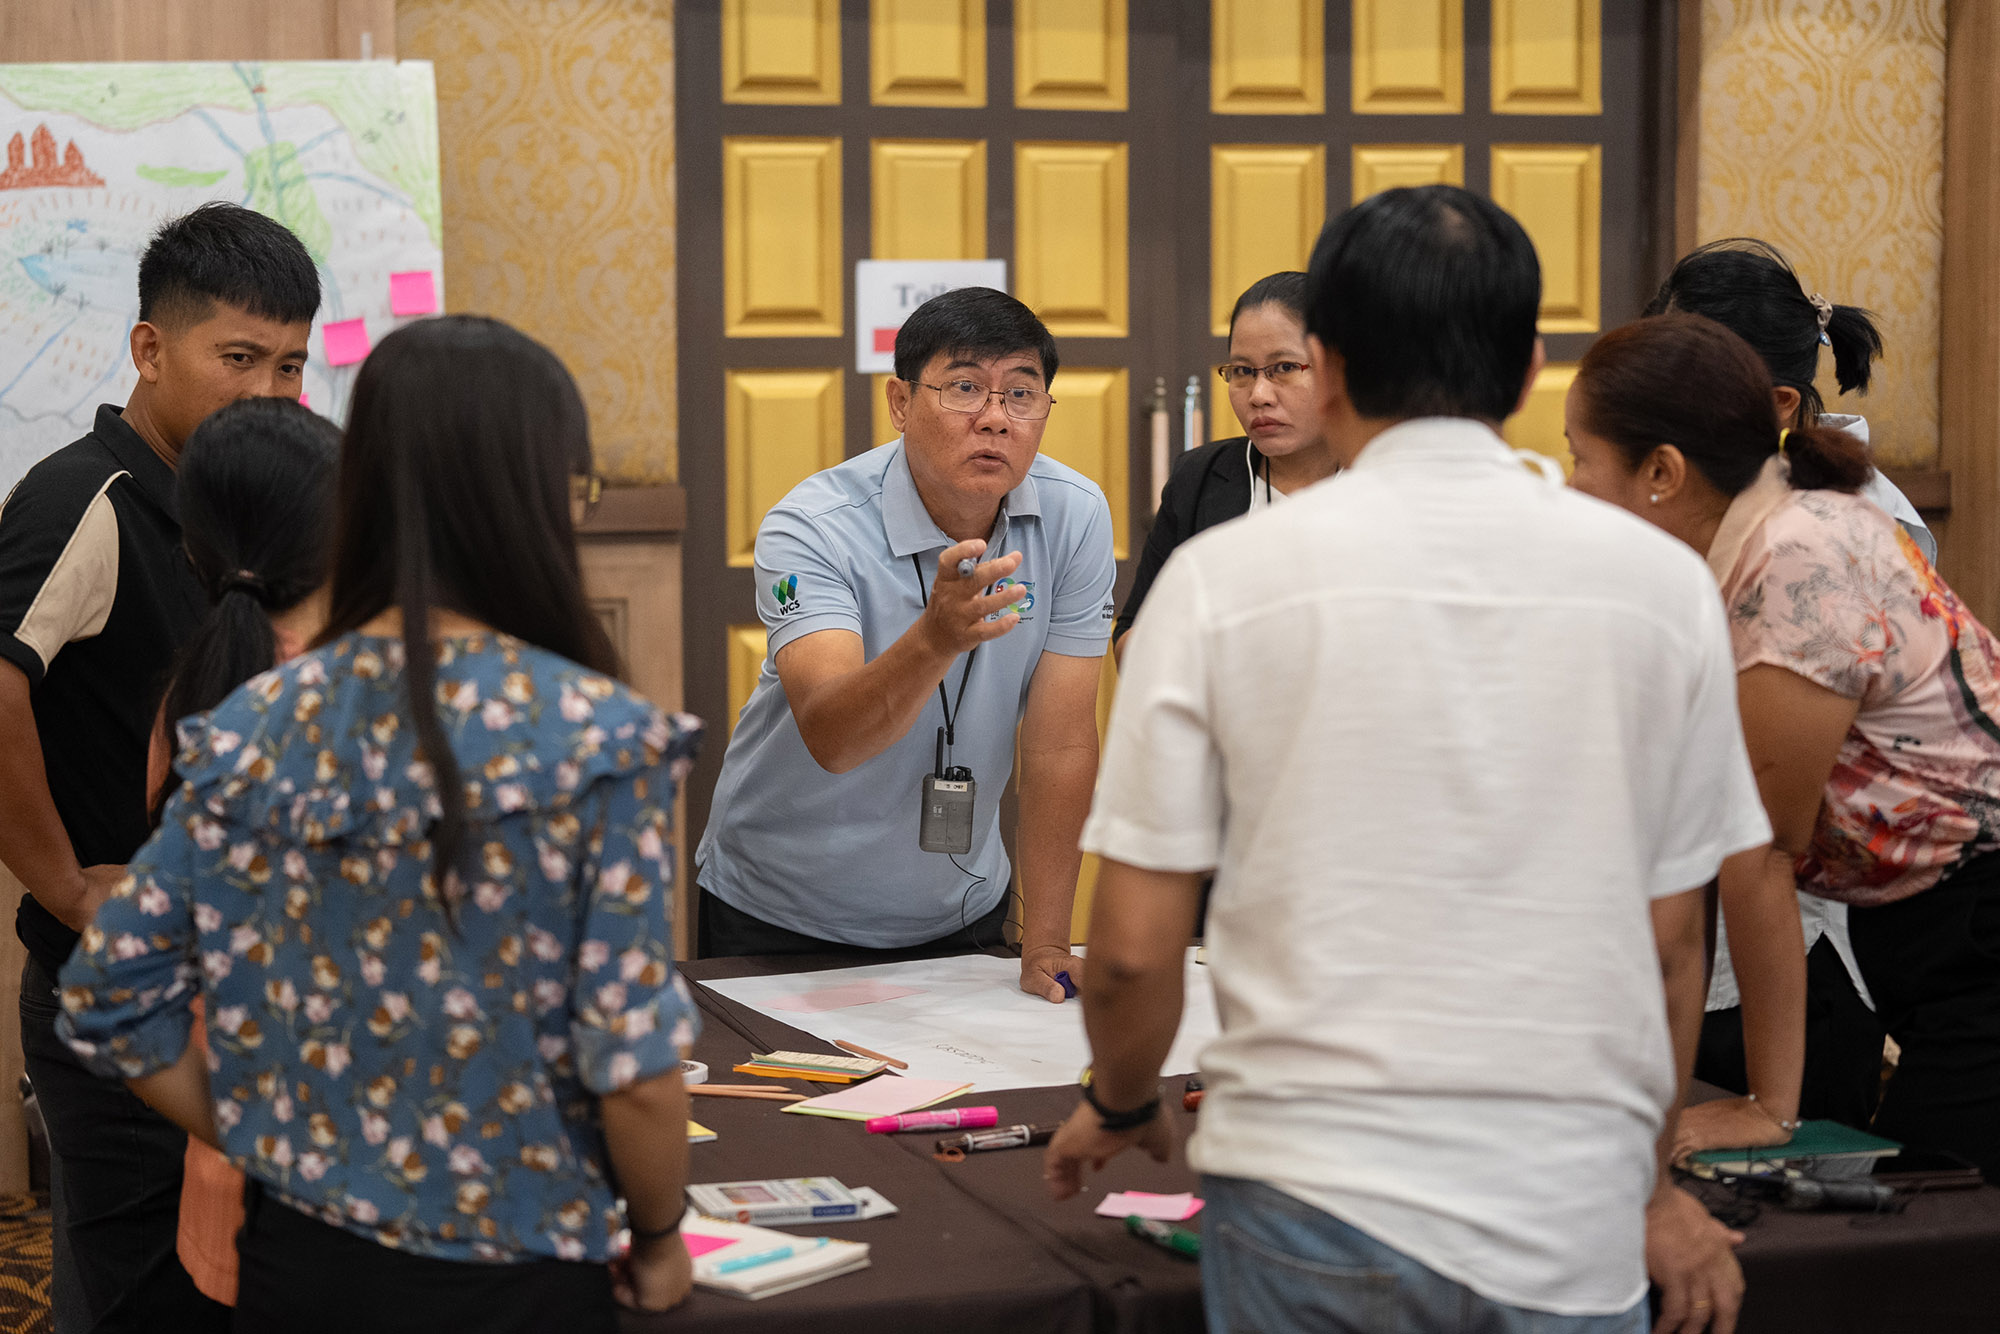 Through group interactions and exercises, community members and other stakeholders explored the profound connections local communities have with their forests.